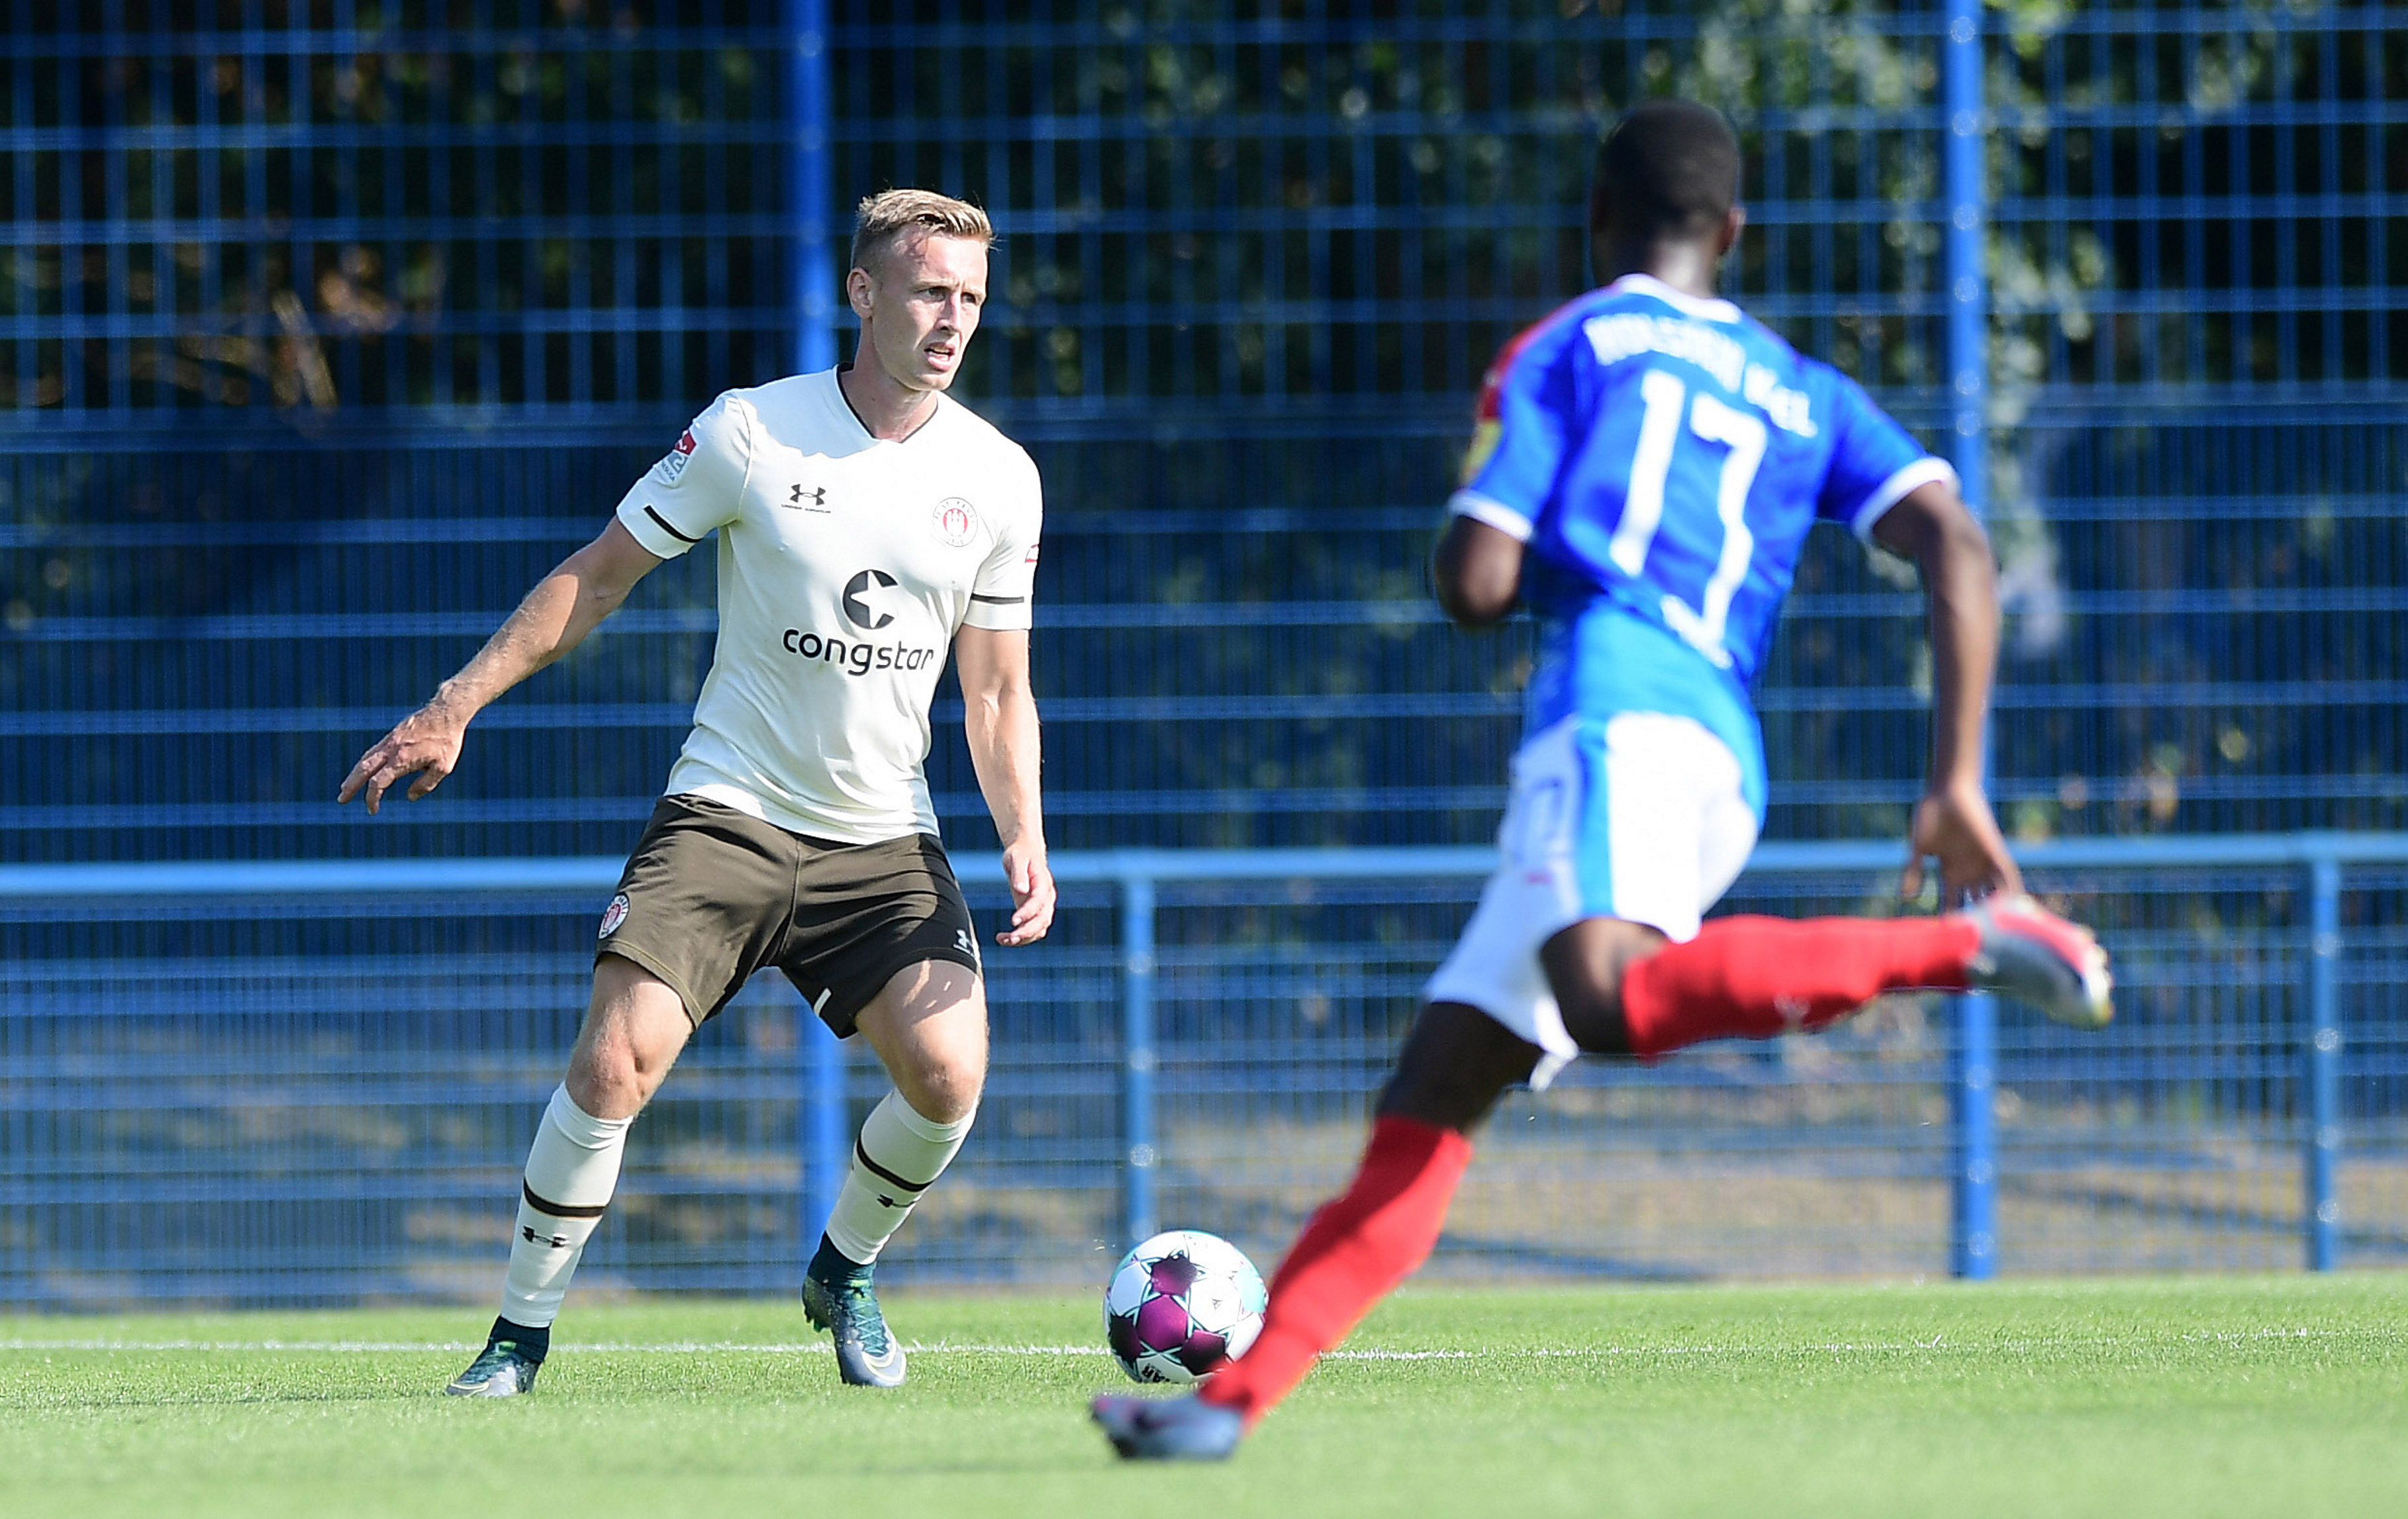 Sebastian Ohlsson began the opening warm-up game against Holstein Kiel on the right of a back three alongside Marvin Senger and Philipp Ziereis.